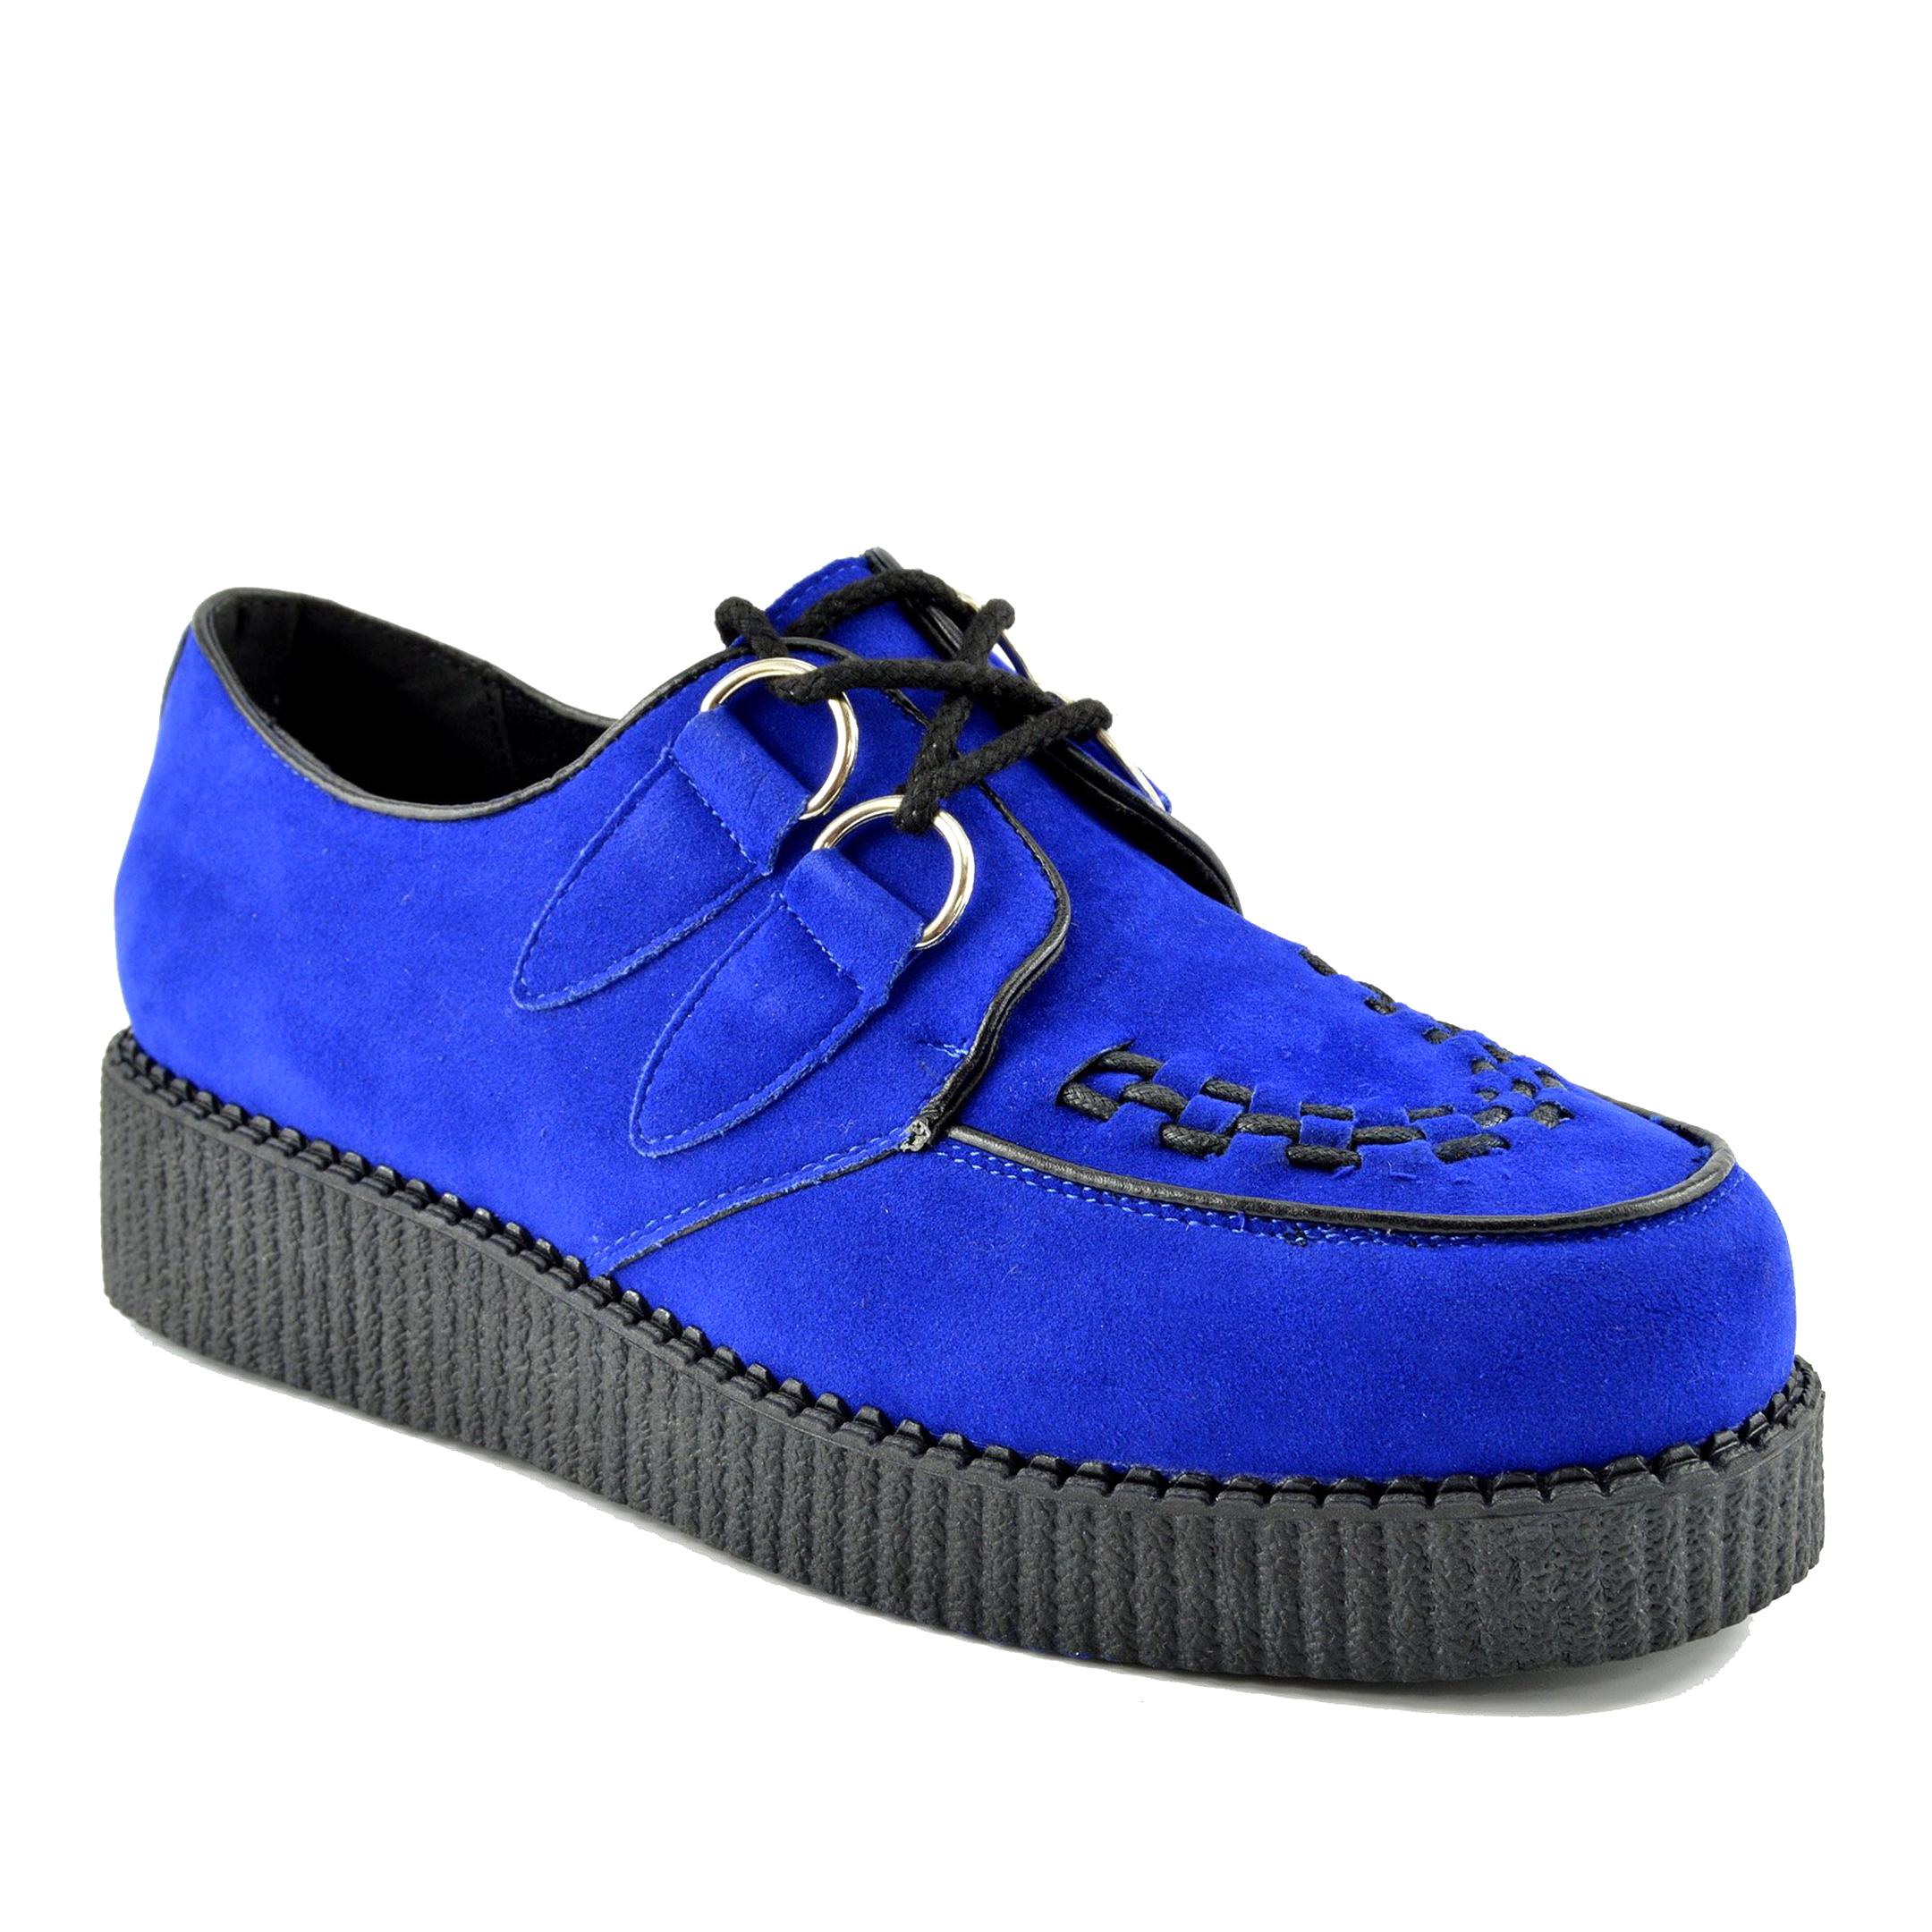 Teddy Boy Shoes for sale in UK | 66 used Teddy Boy Shoes